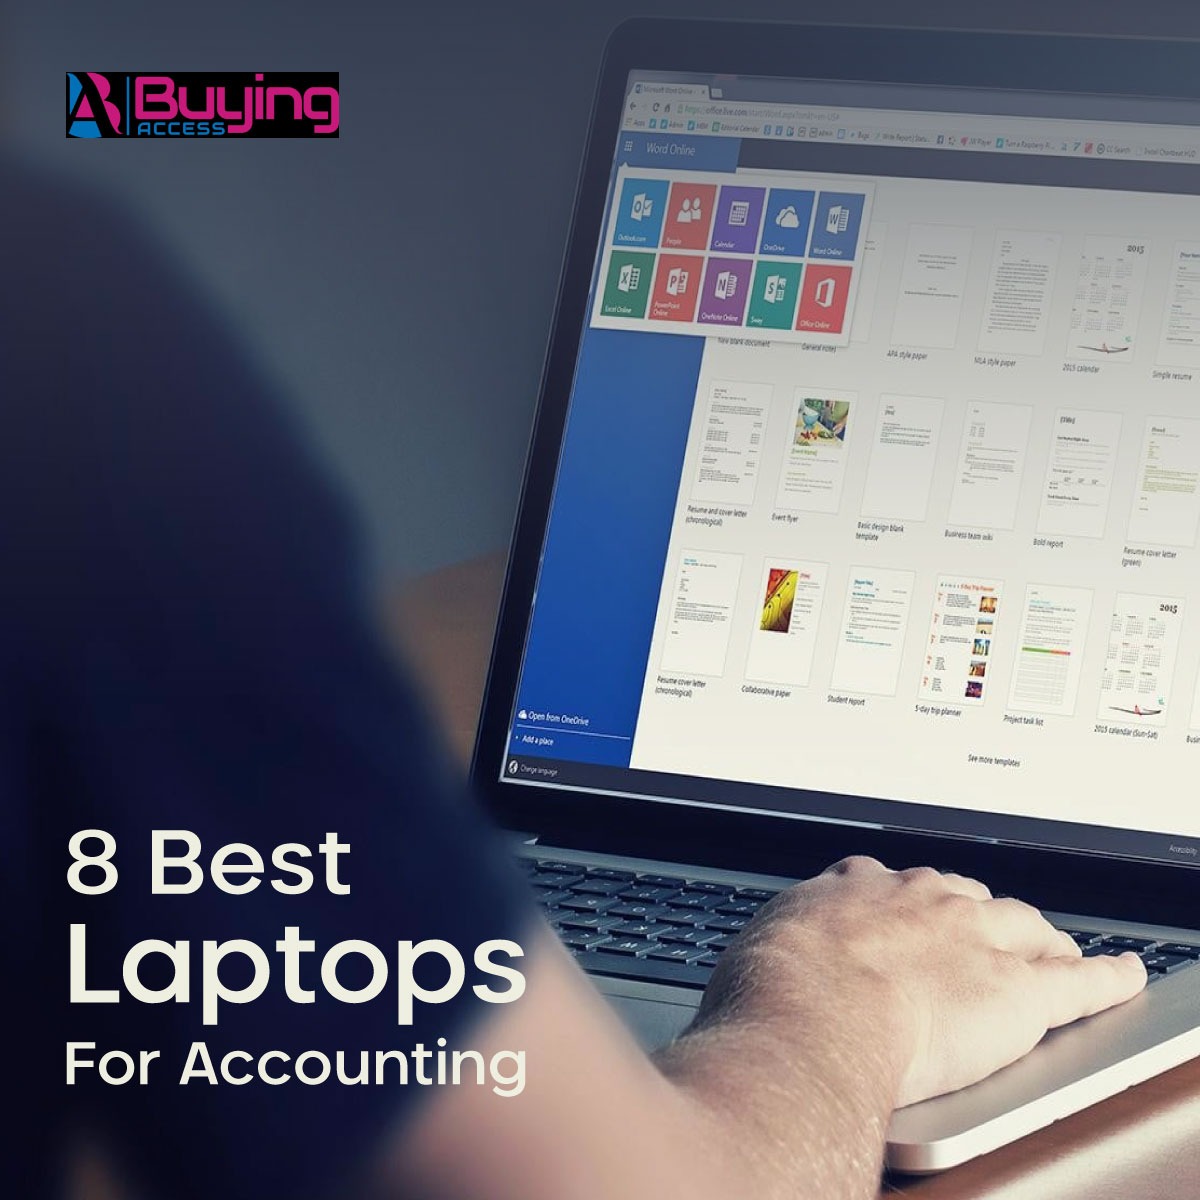 Laptops for Accounting